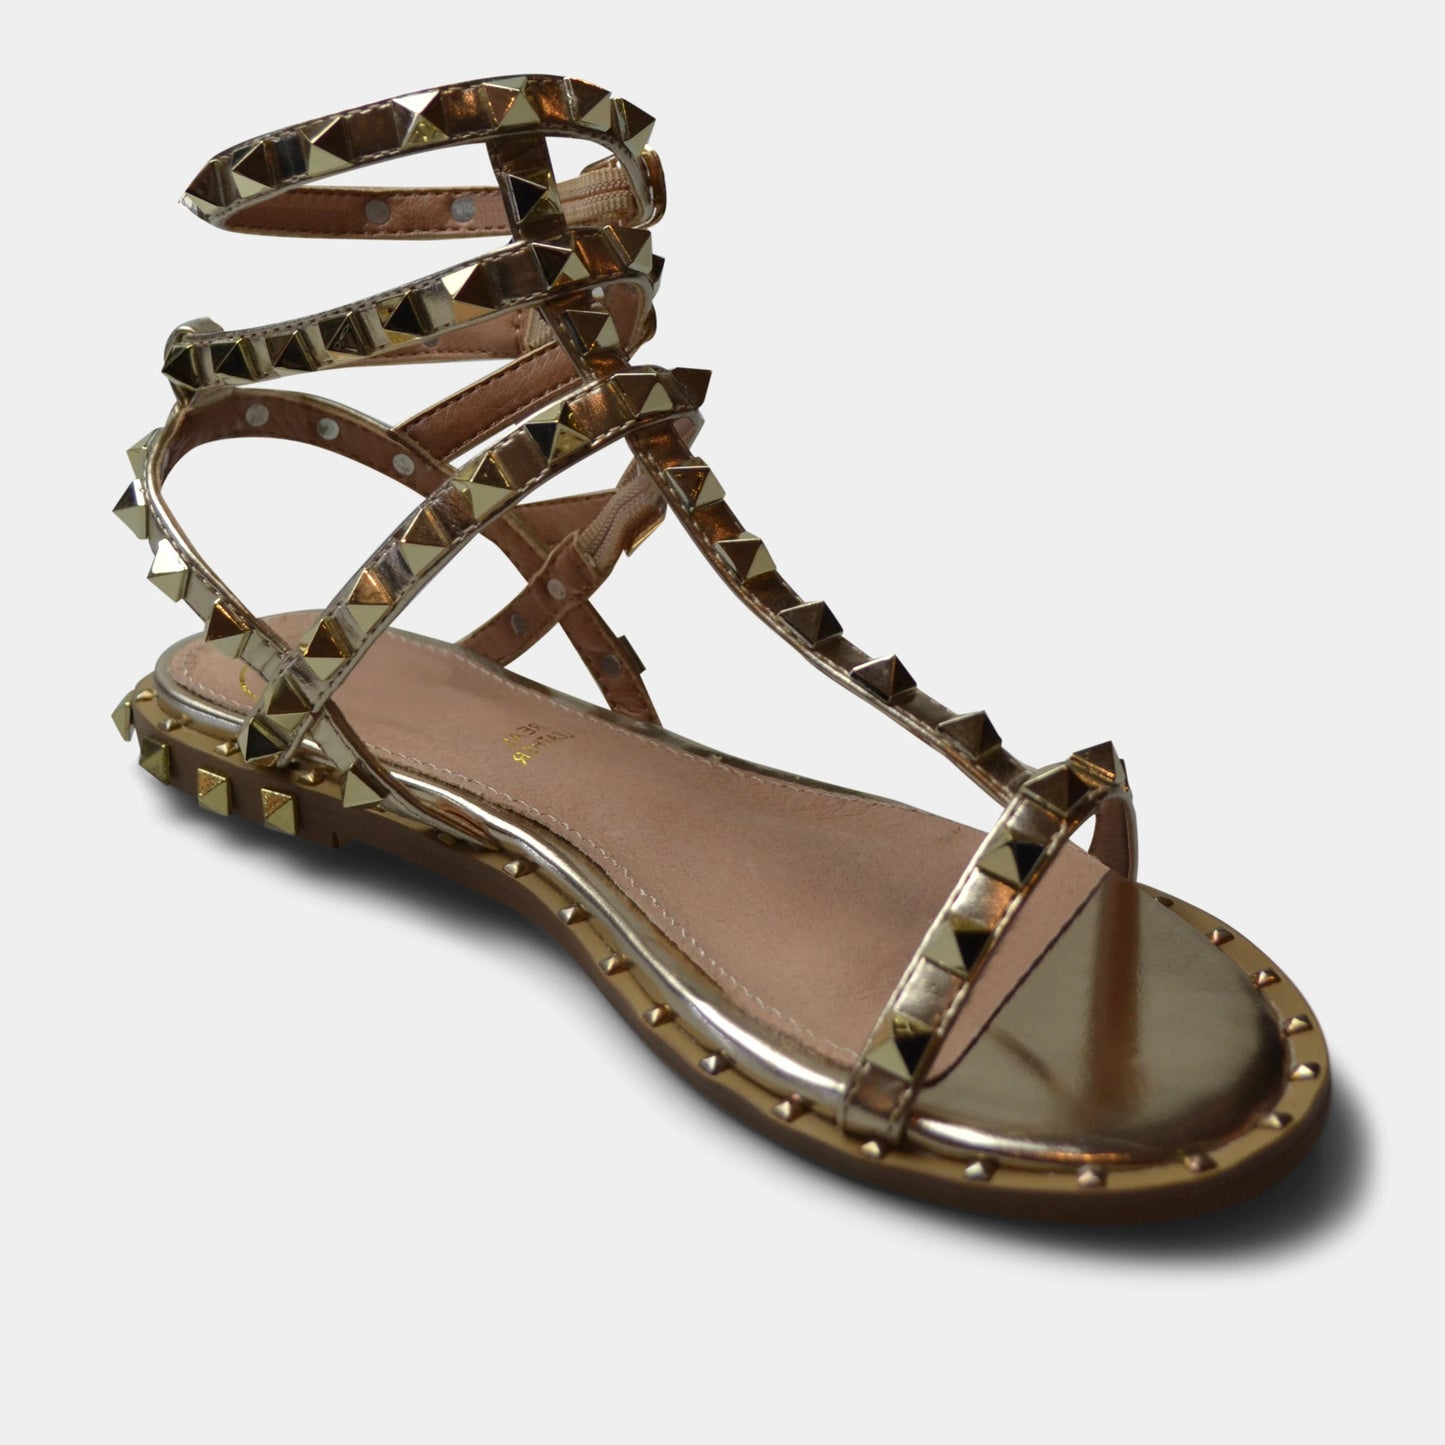 EXE' SANDAL IN GOLD